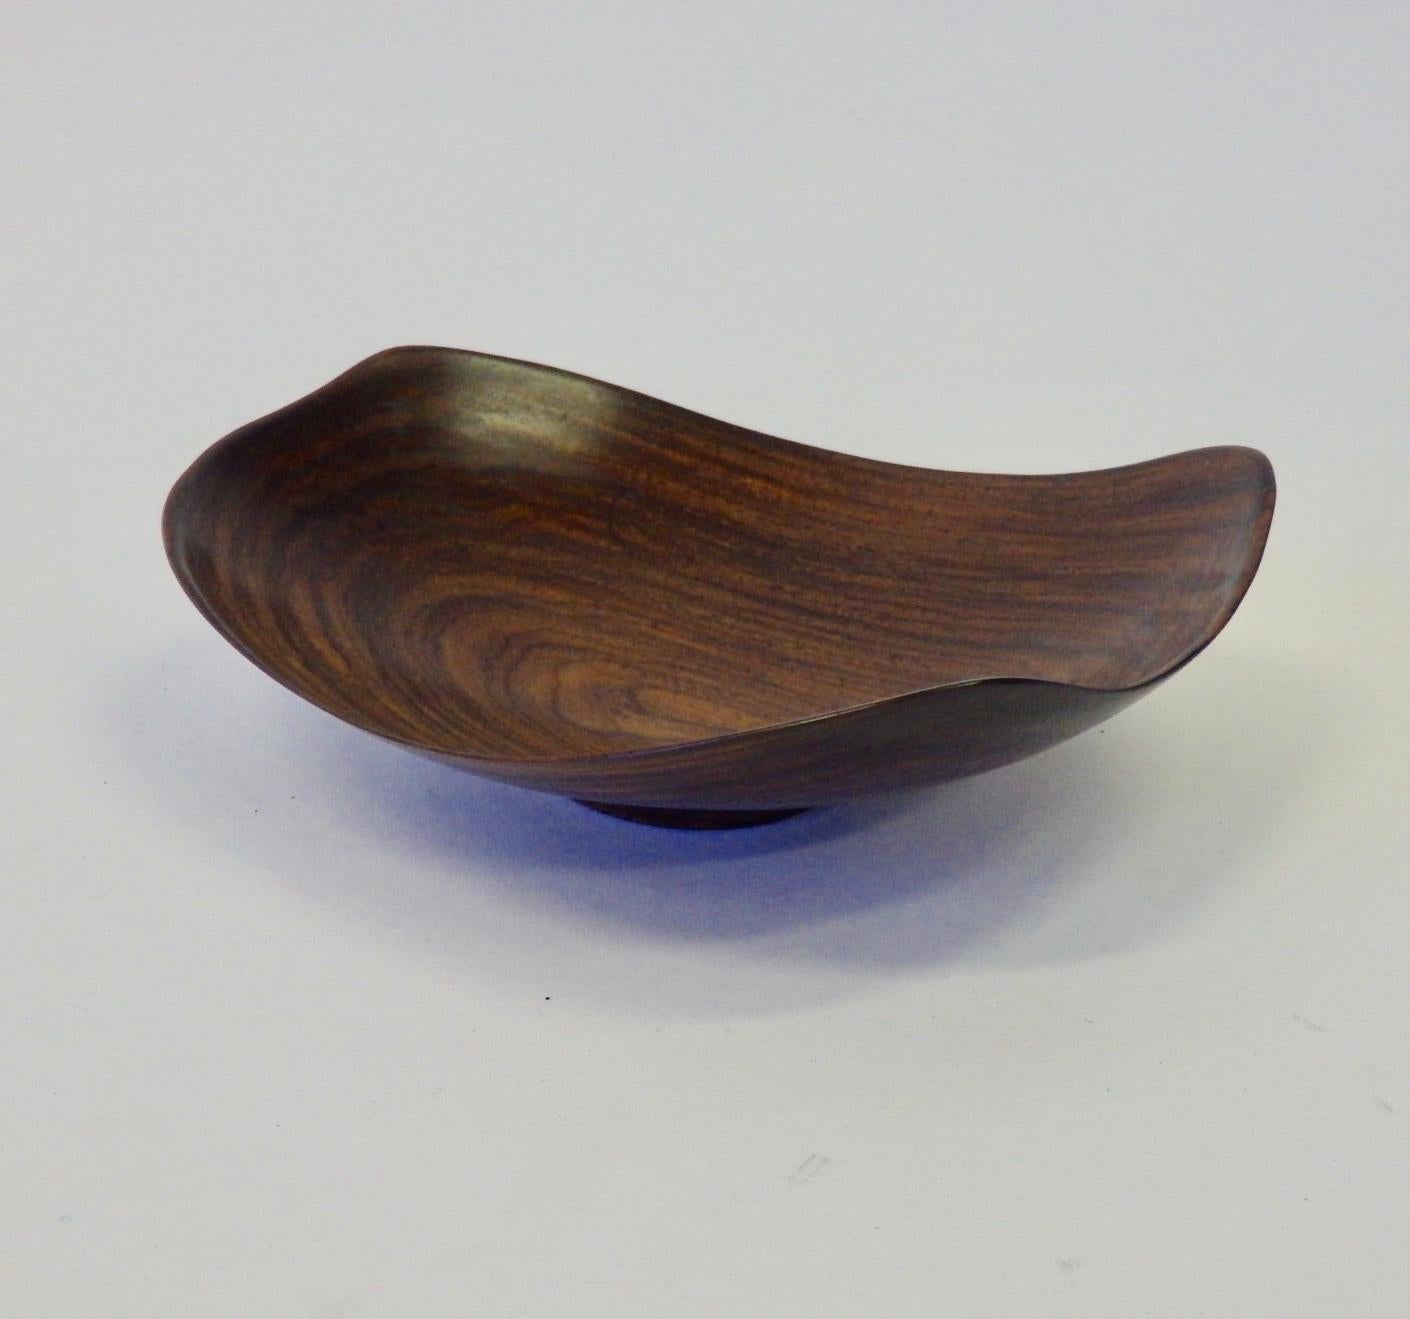 Nicely turned thin wall rosewood bowl. Apologies but illegible signature, date and wood type. There is an age crack.